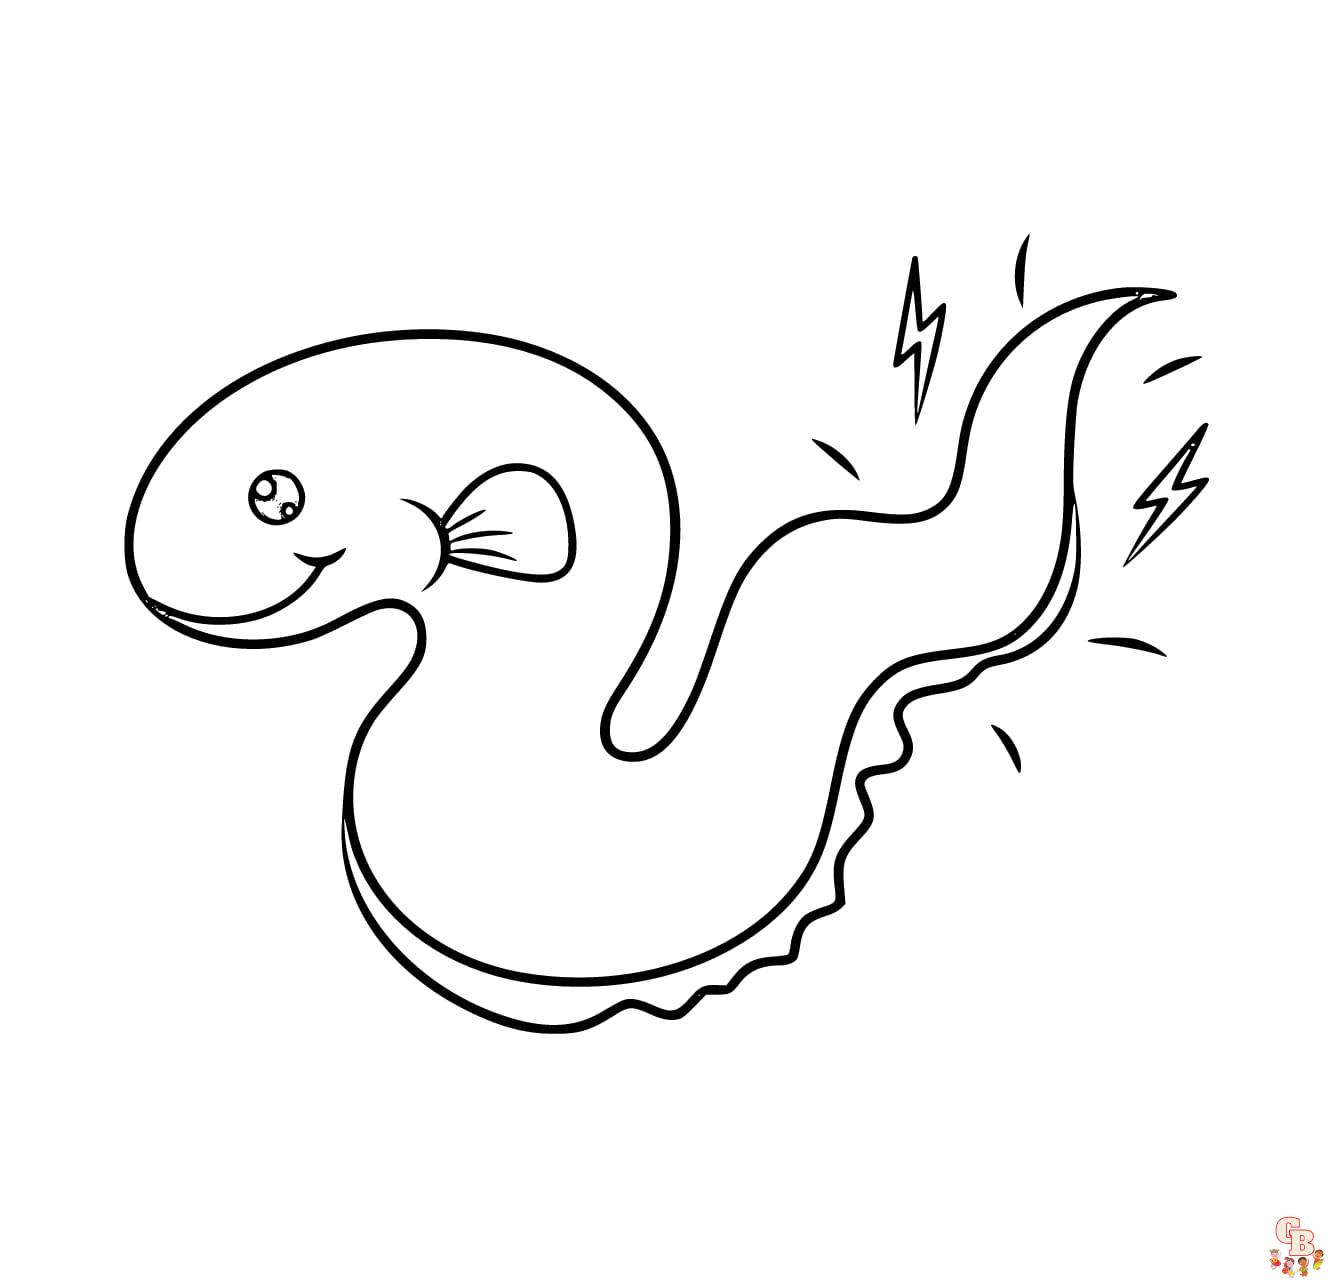 Eel coloring pages printable